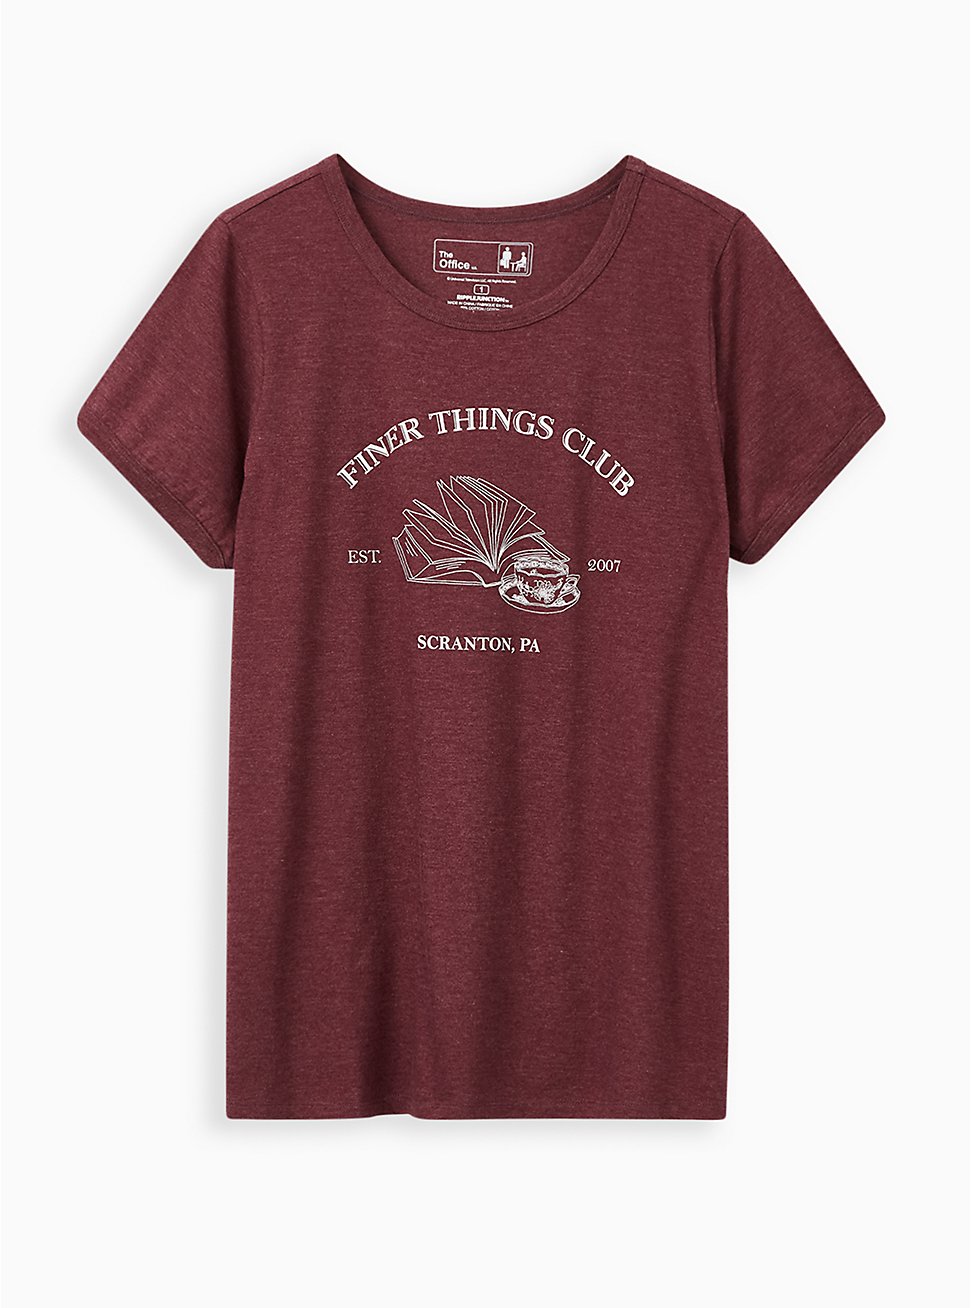 Classic Fit Ringer Tee - The Office Finer Things Burgundy, BURGUNDY, hi-res